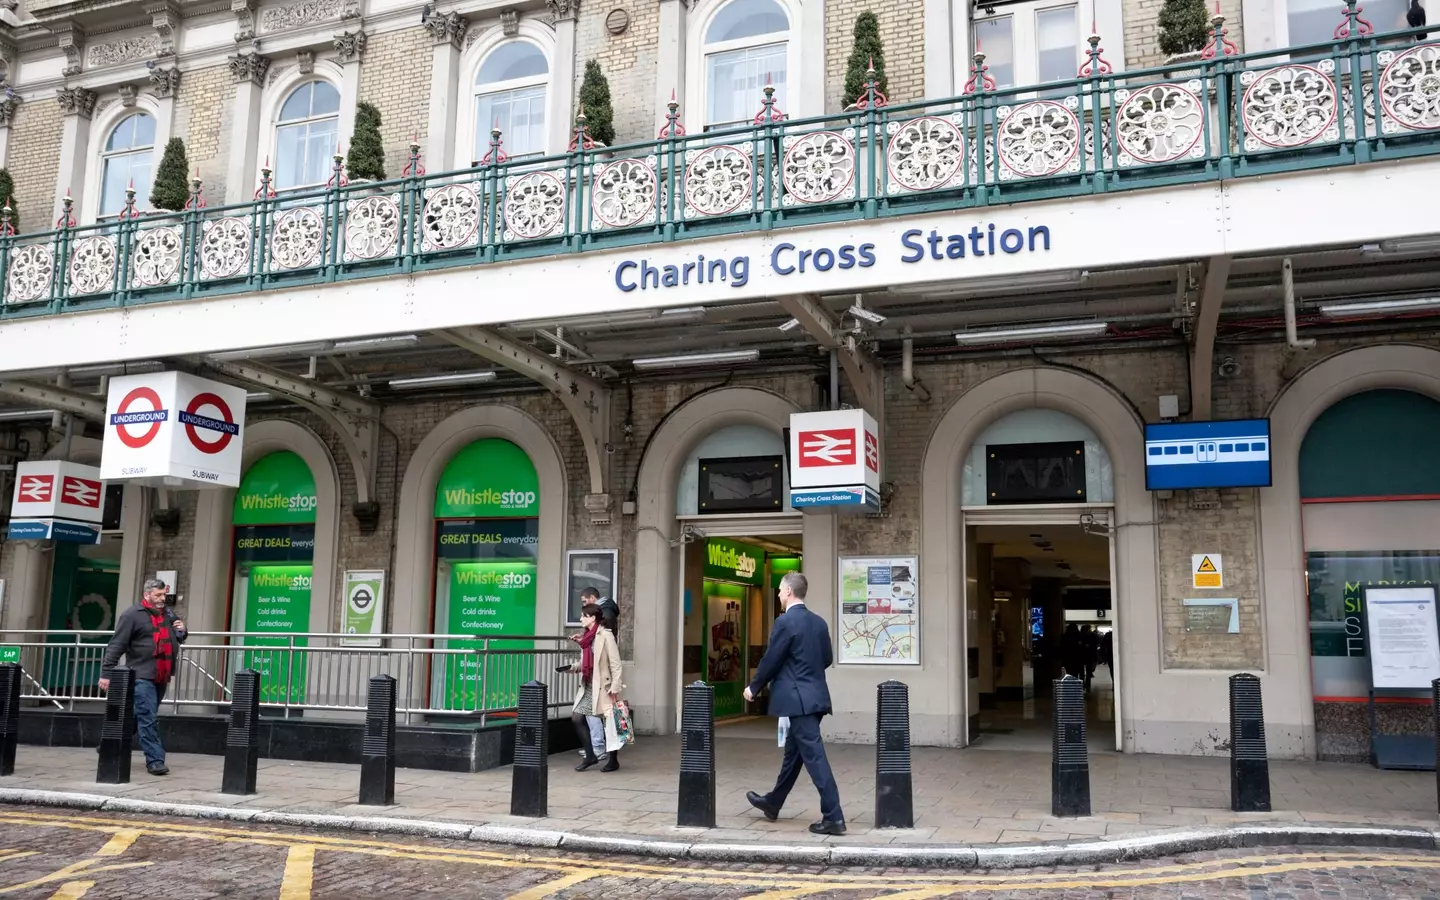 The officers worked at Charing Cross station (